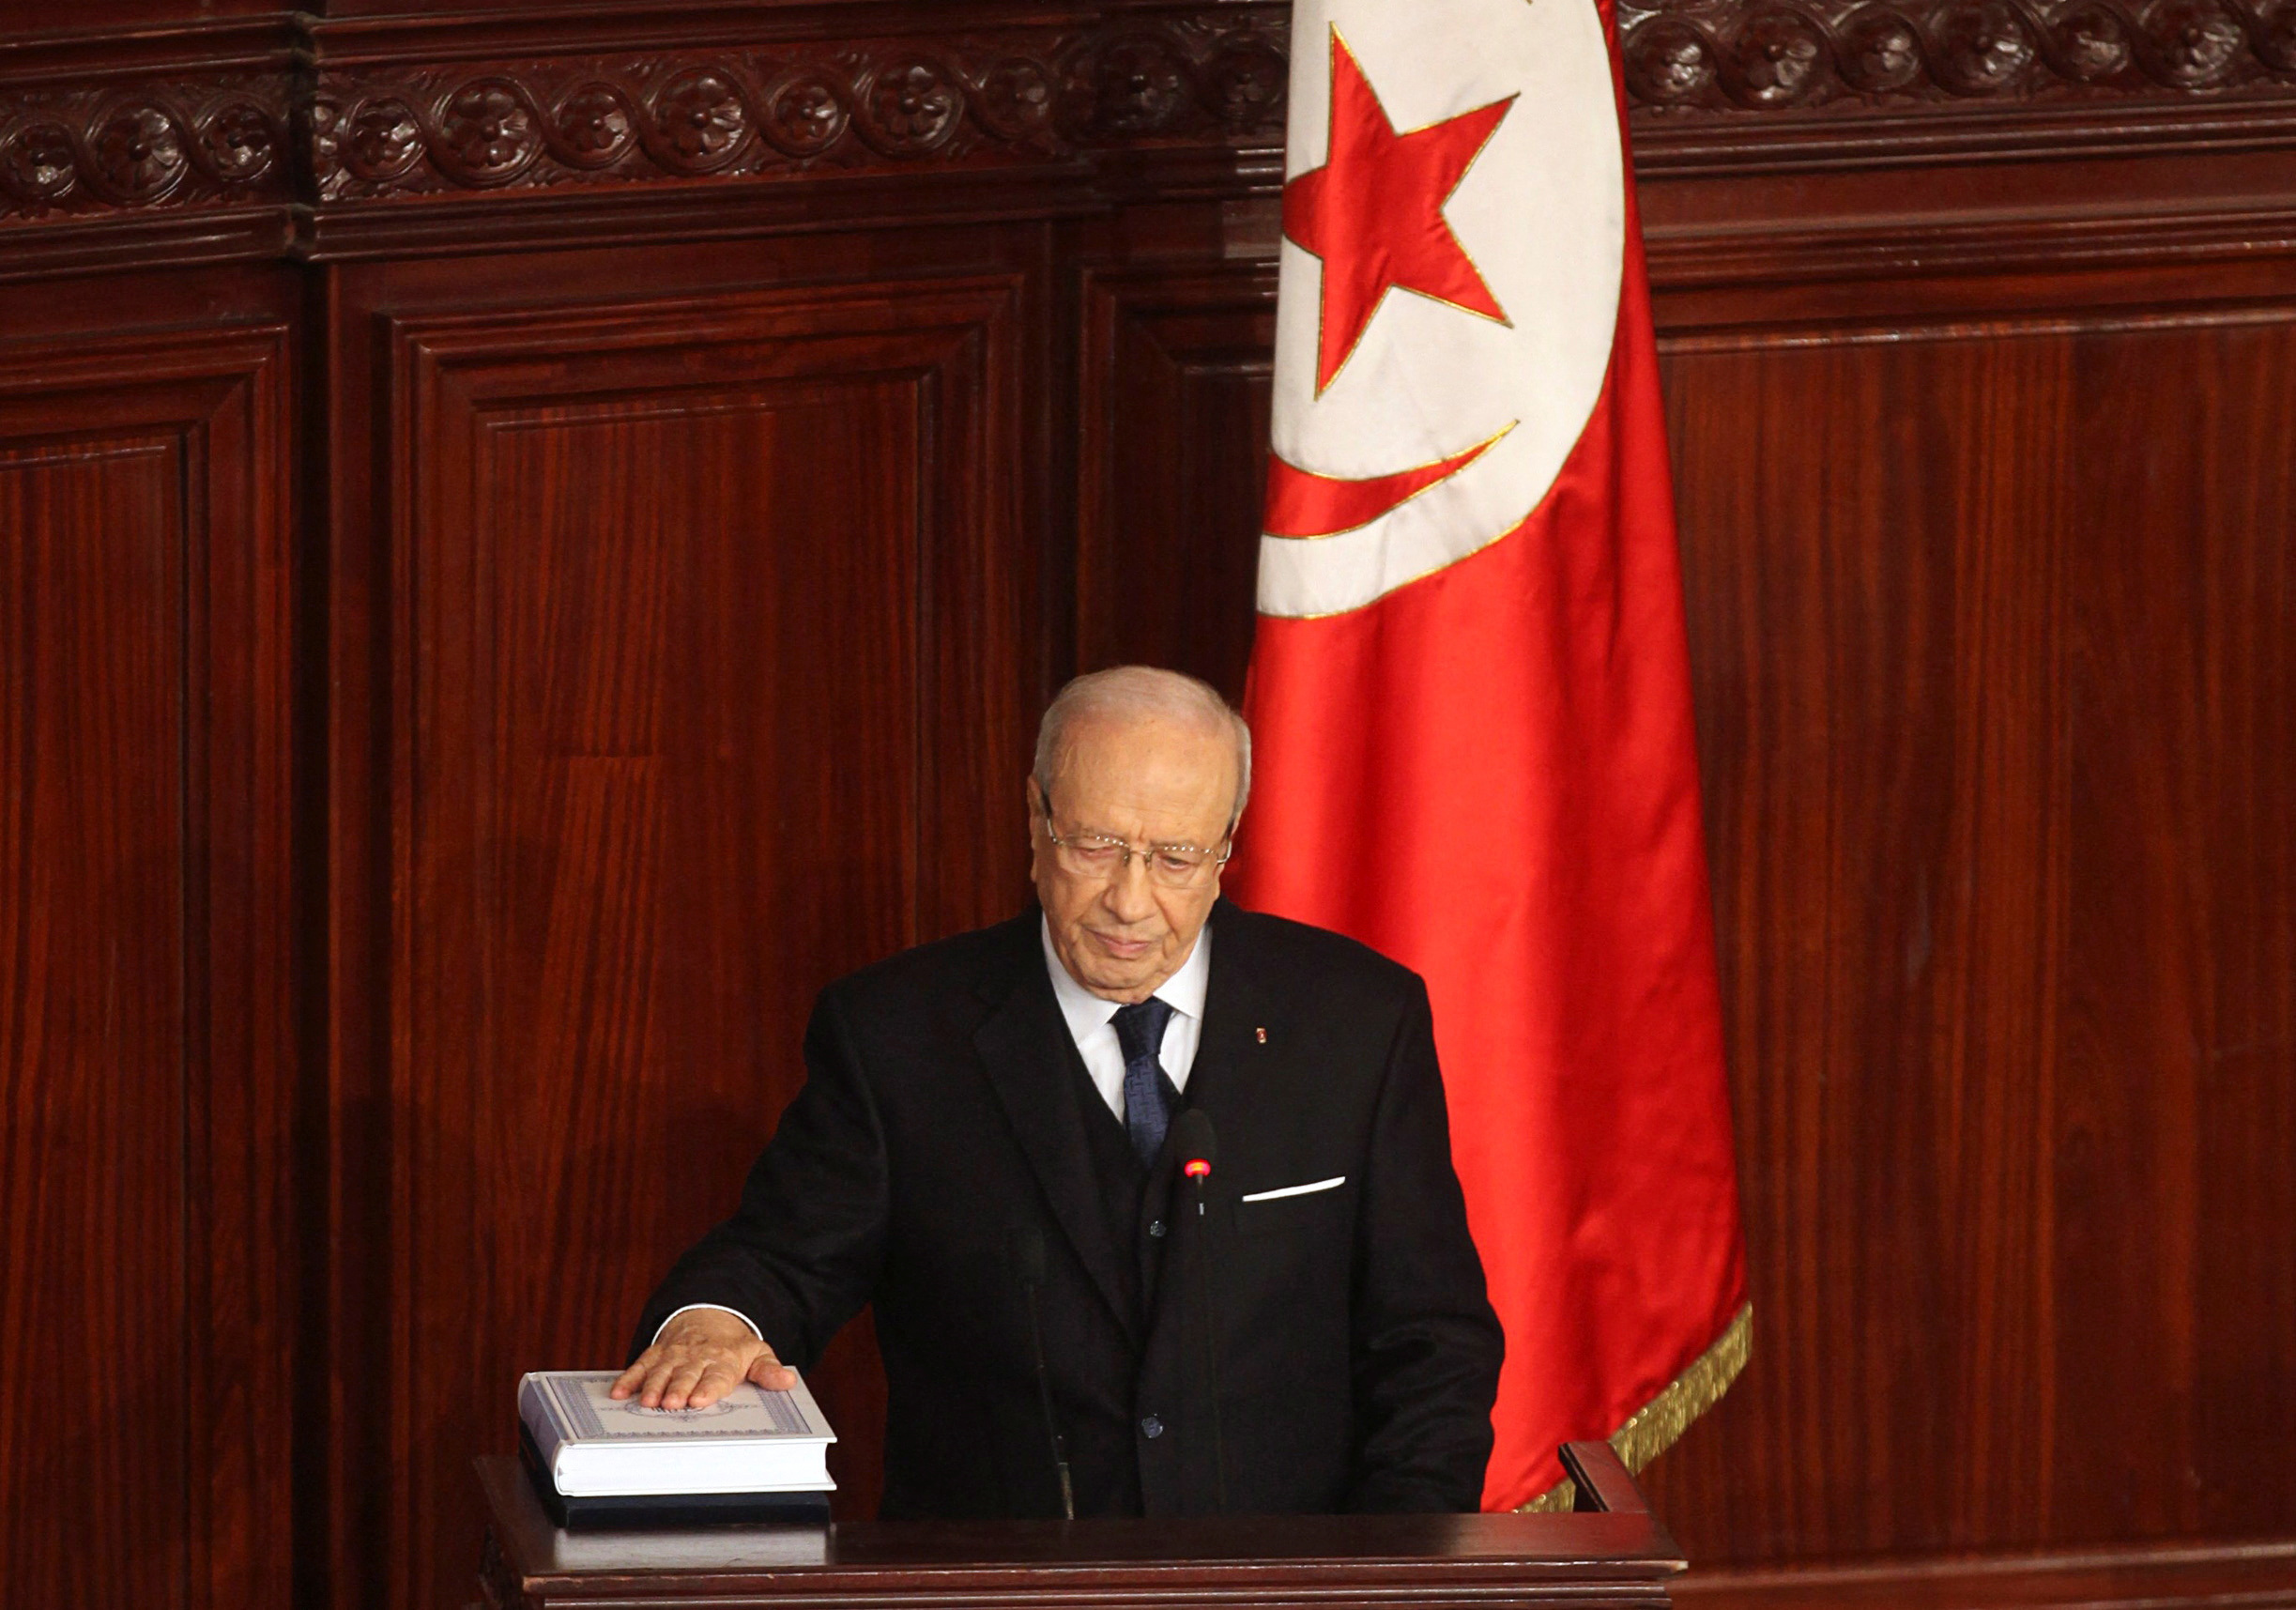 Tunisia's President Beji Caid Essebsi takes the oath of office at the constituent assembly in Tunis